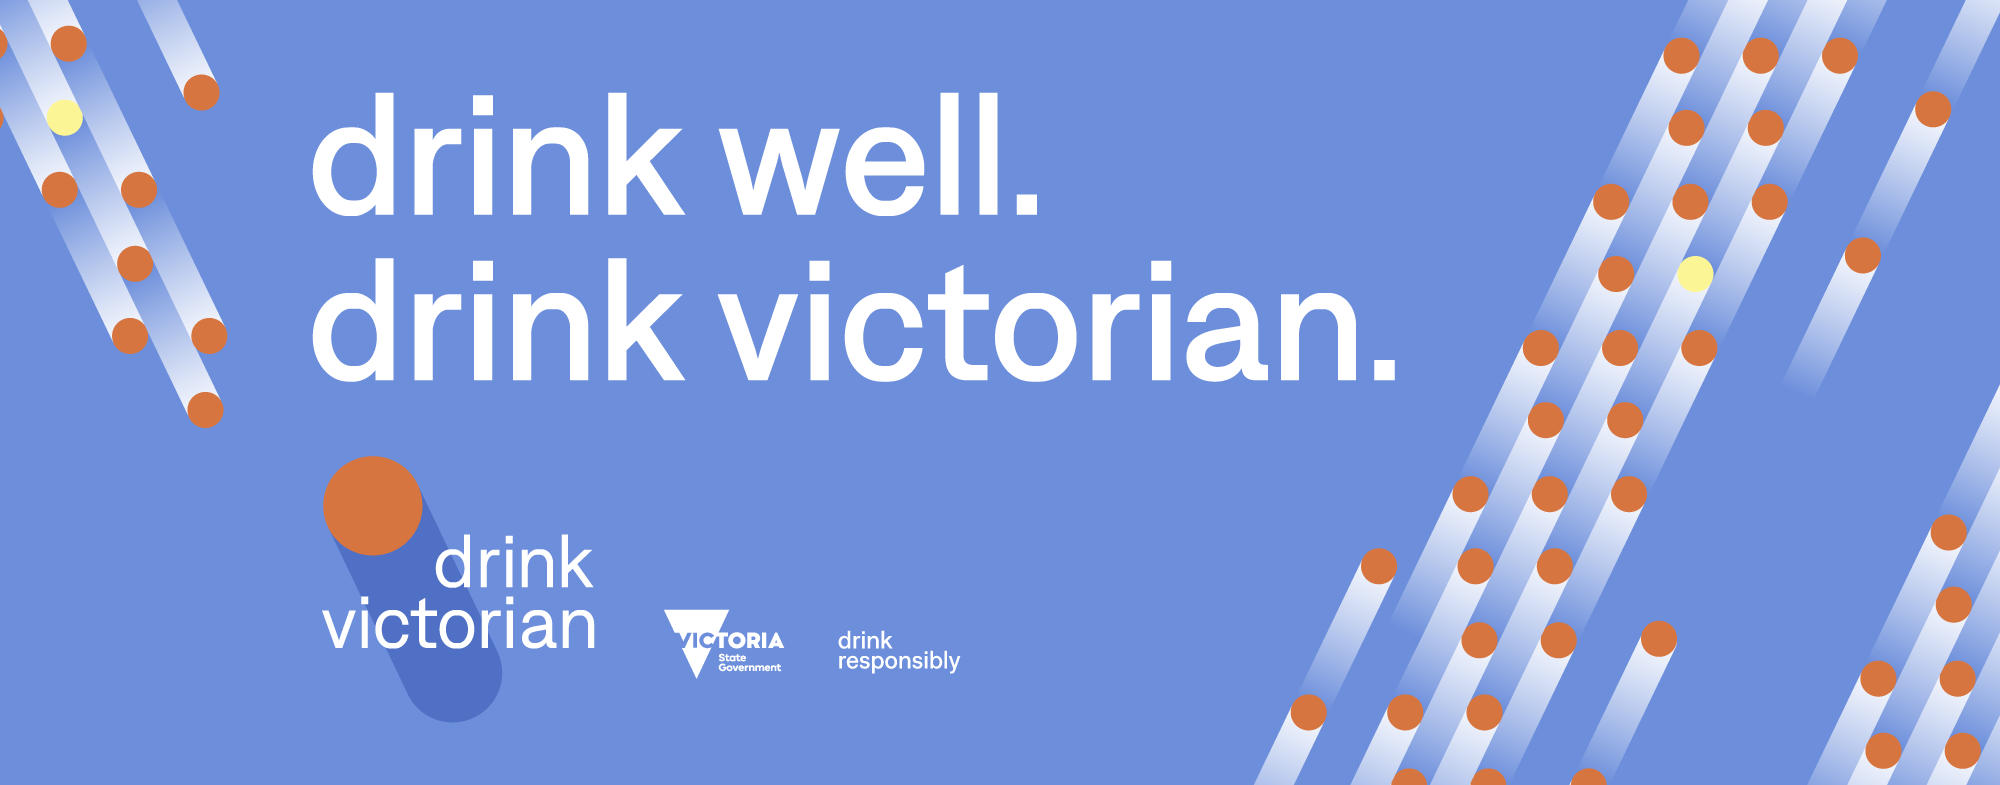 branded web banner for Drink Victorian Program campaign - pale blue background with white writing all in lower case drink well. drink victorian.